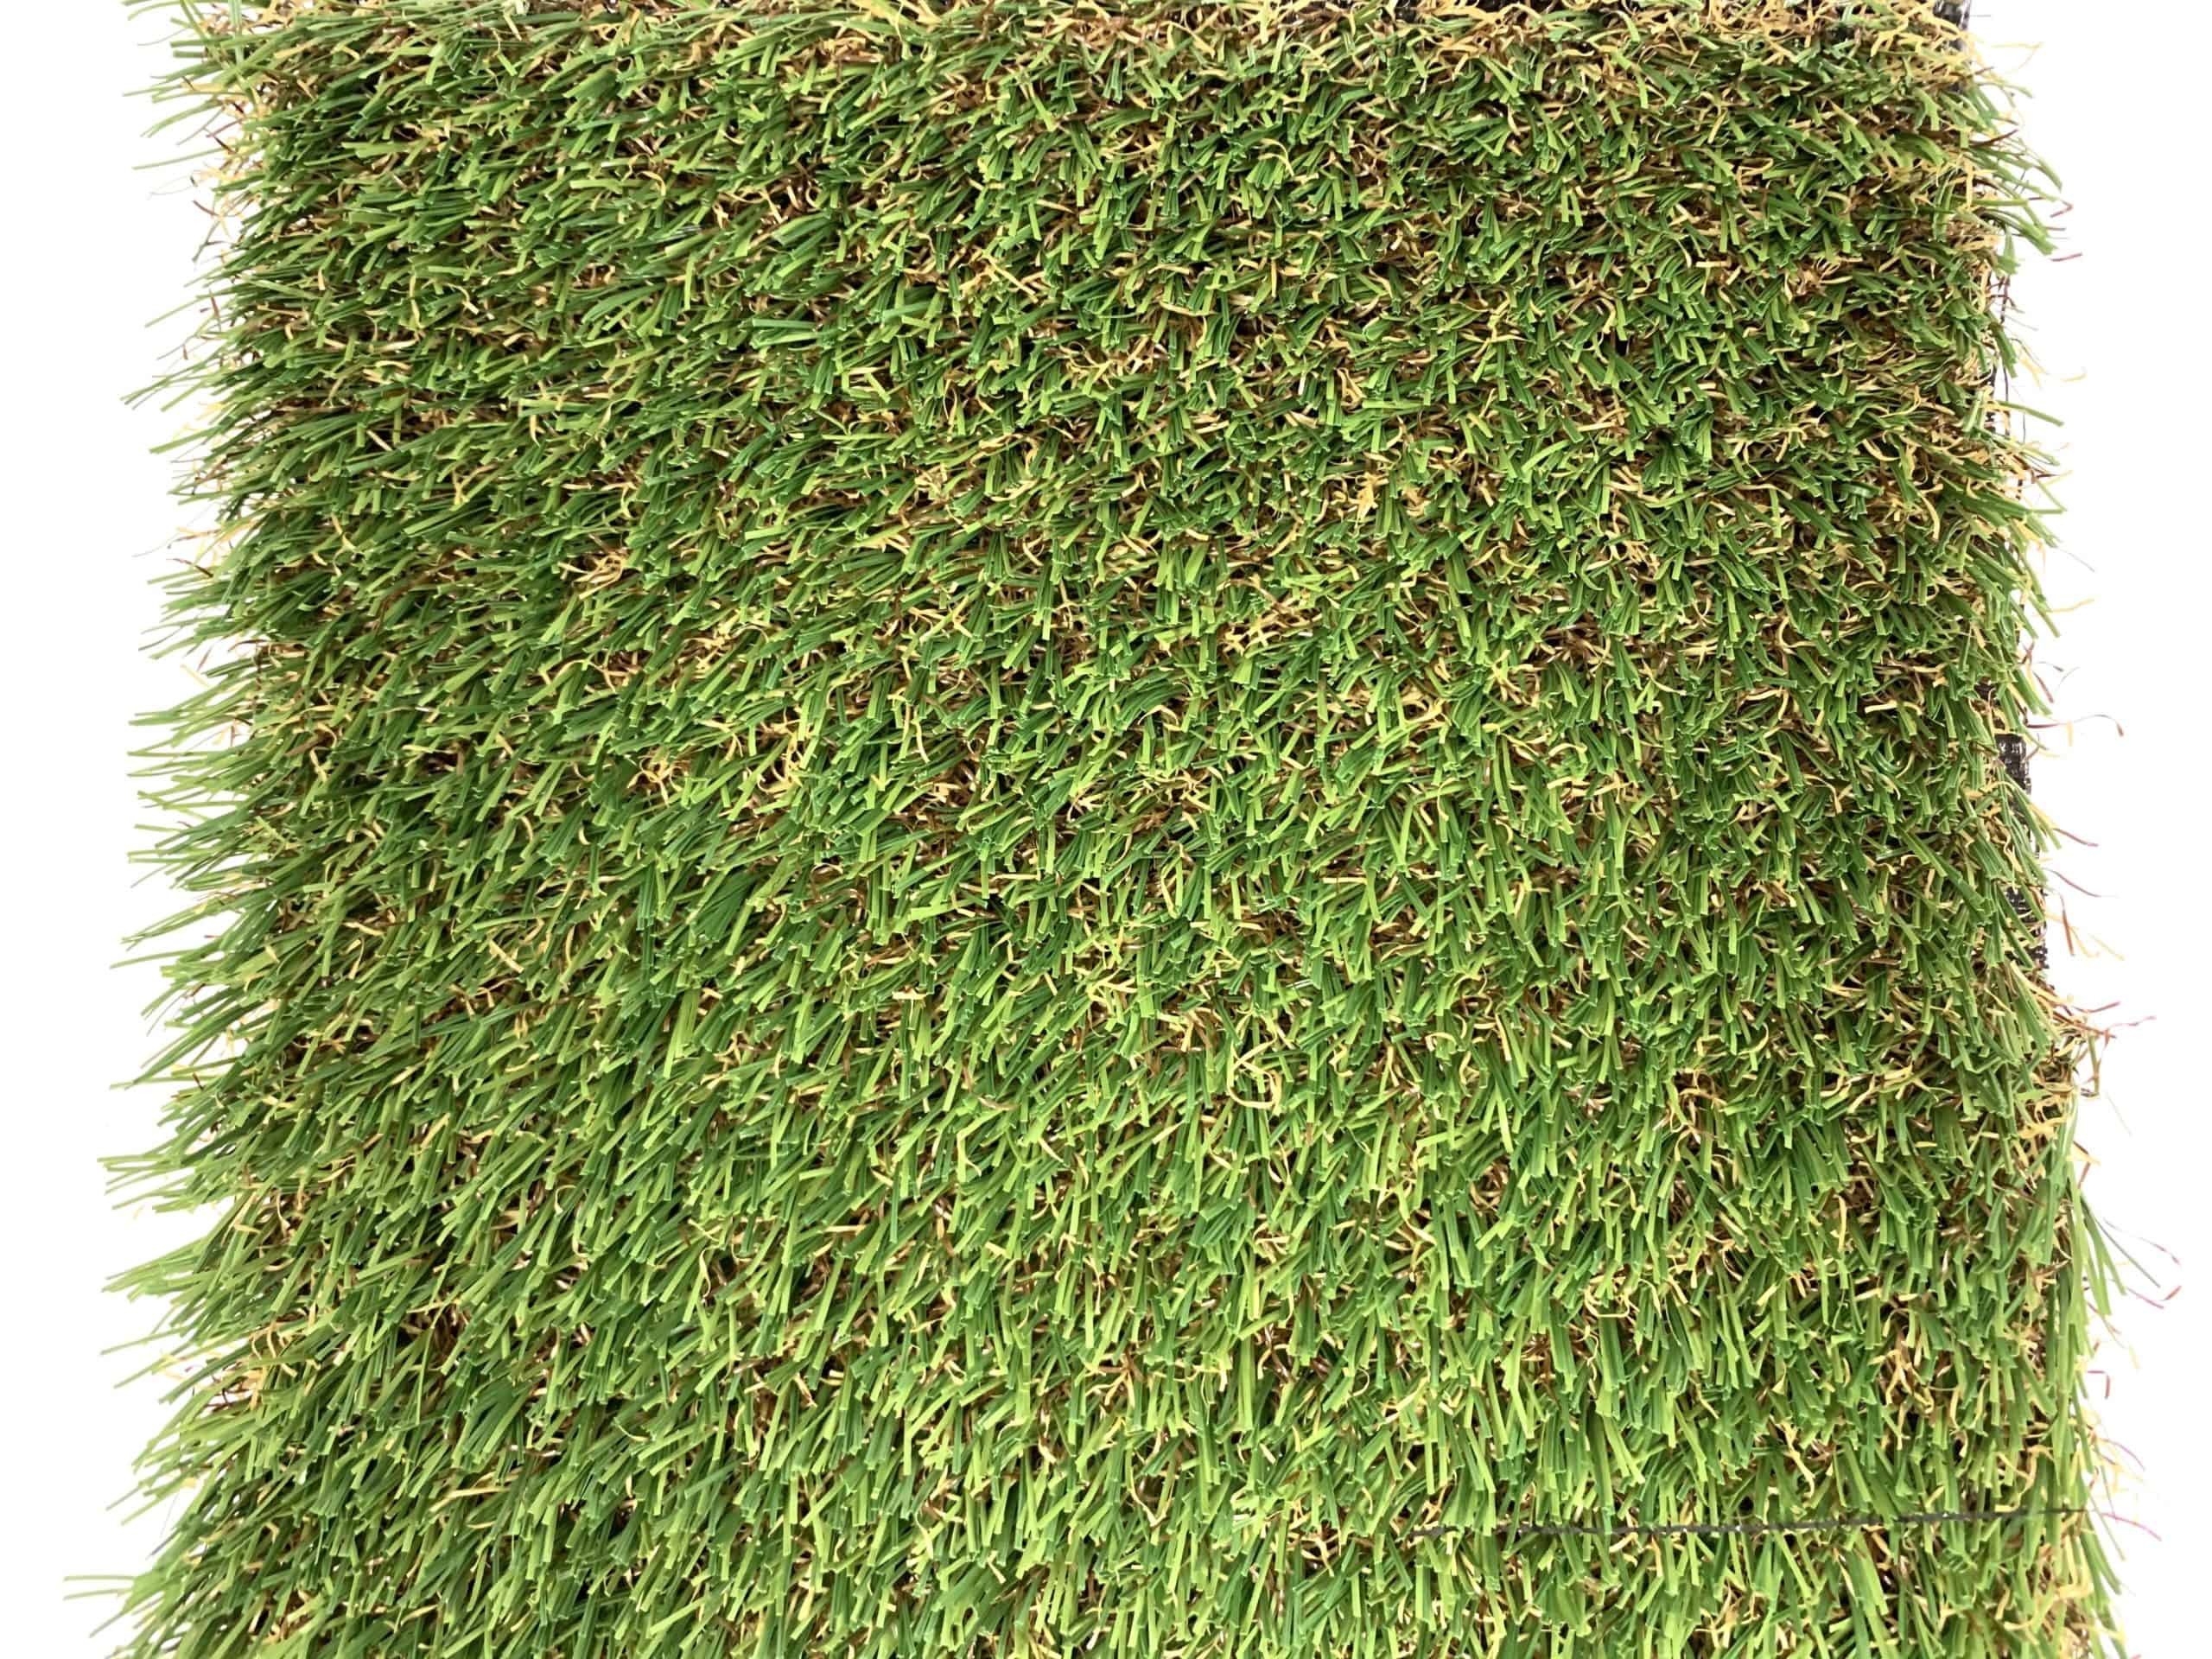 Top view of PG Natural Prime Landscaping Turf